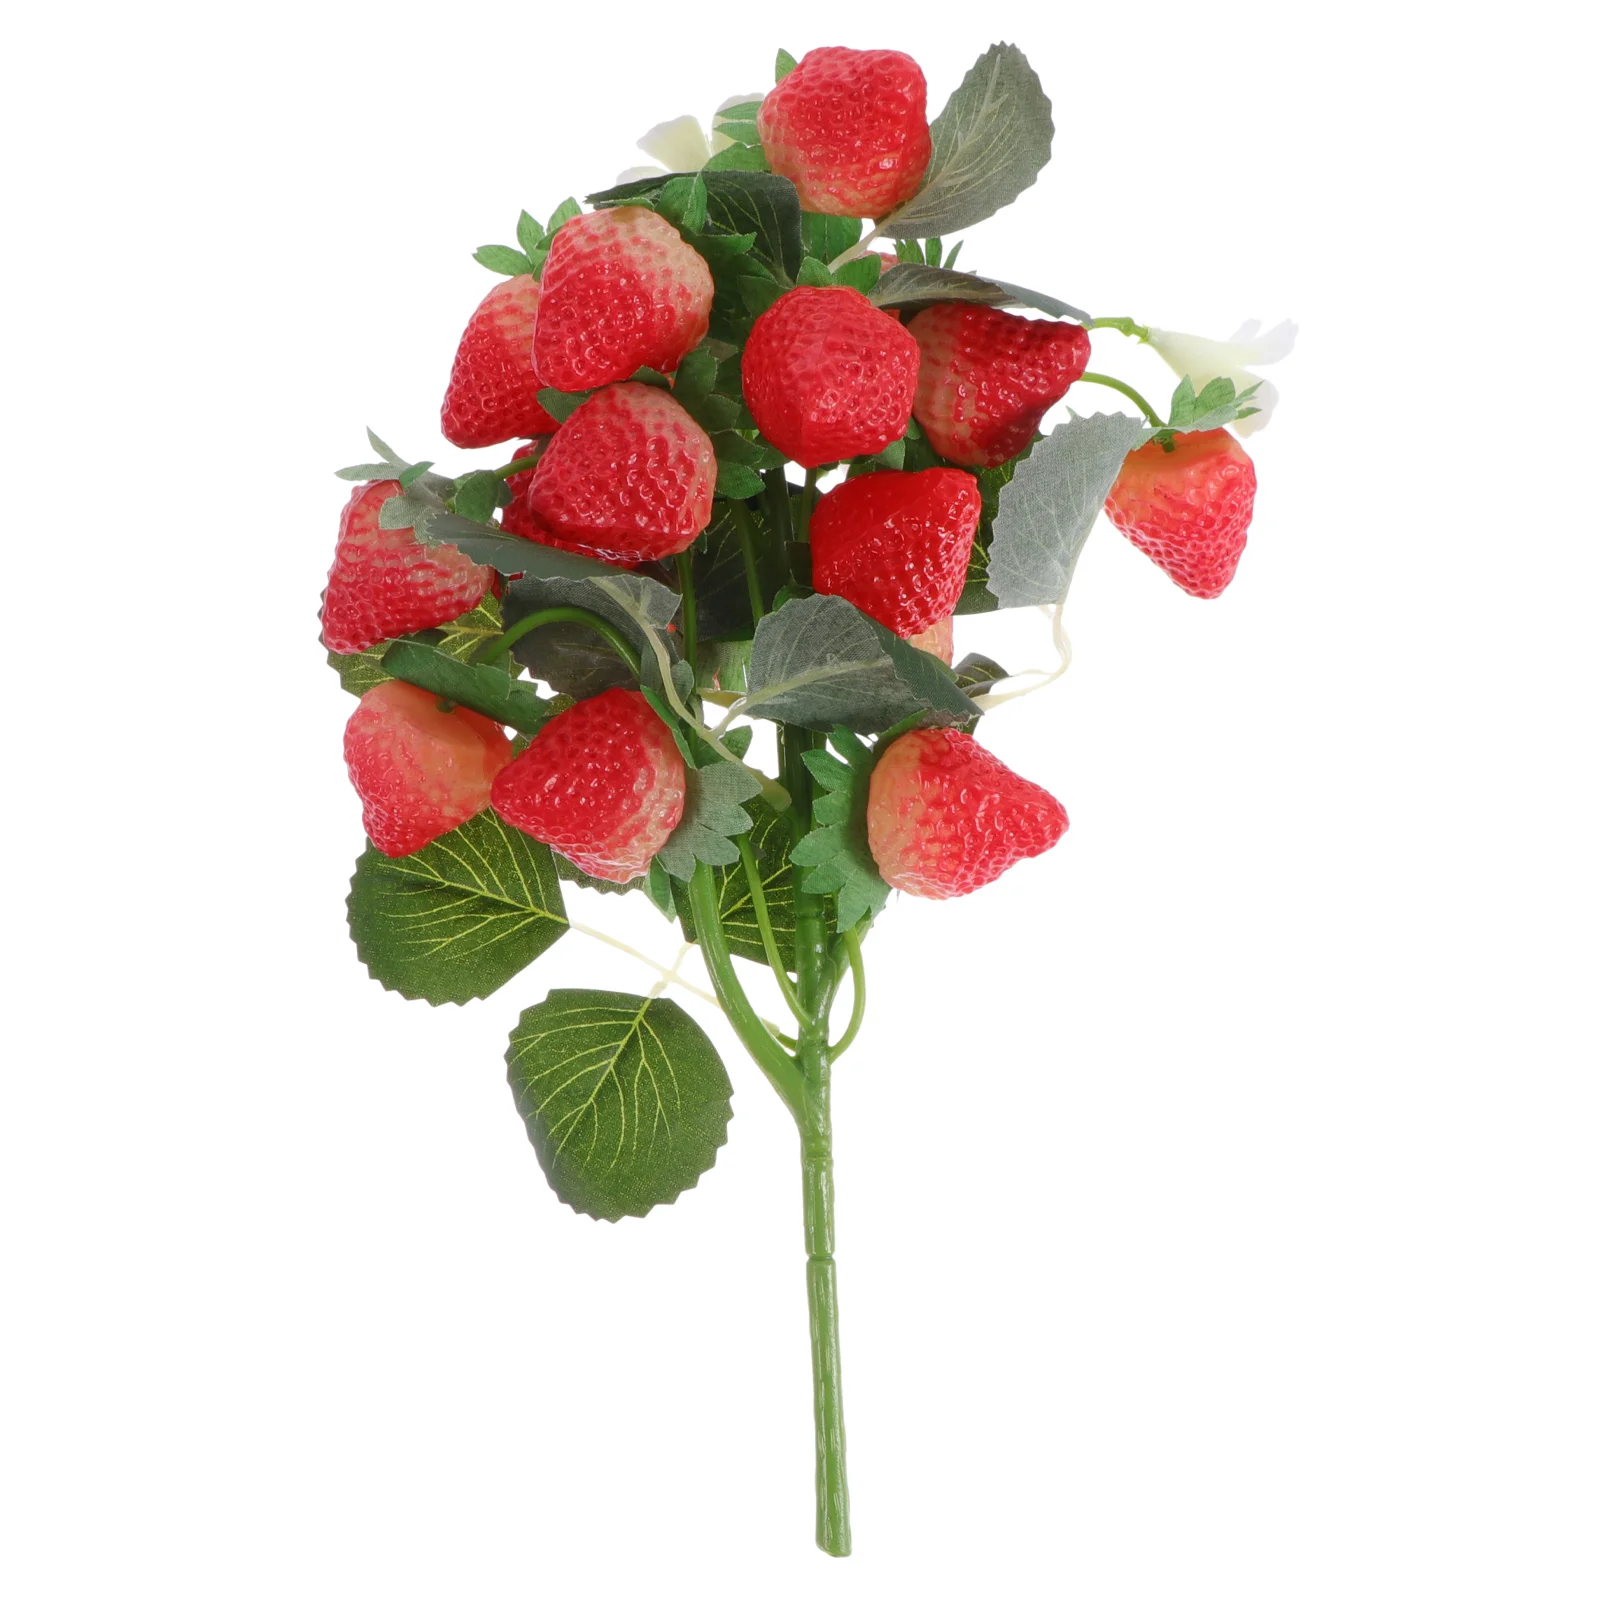 

Strawberry Artificial Fake Strawberries Fruit Decor Faux Flower Branch Bouquet Picks Plastic Decorations Branches Party Lifelike